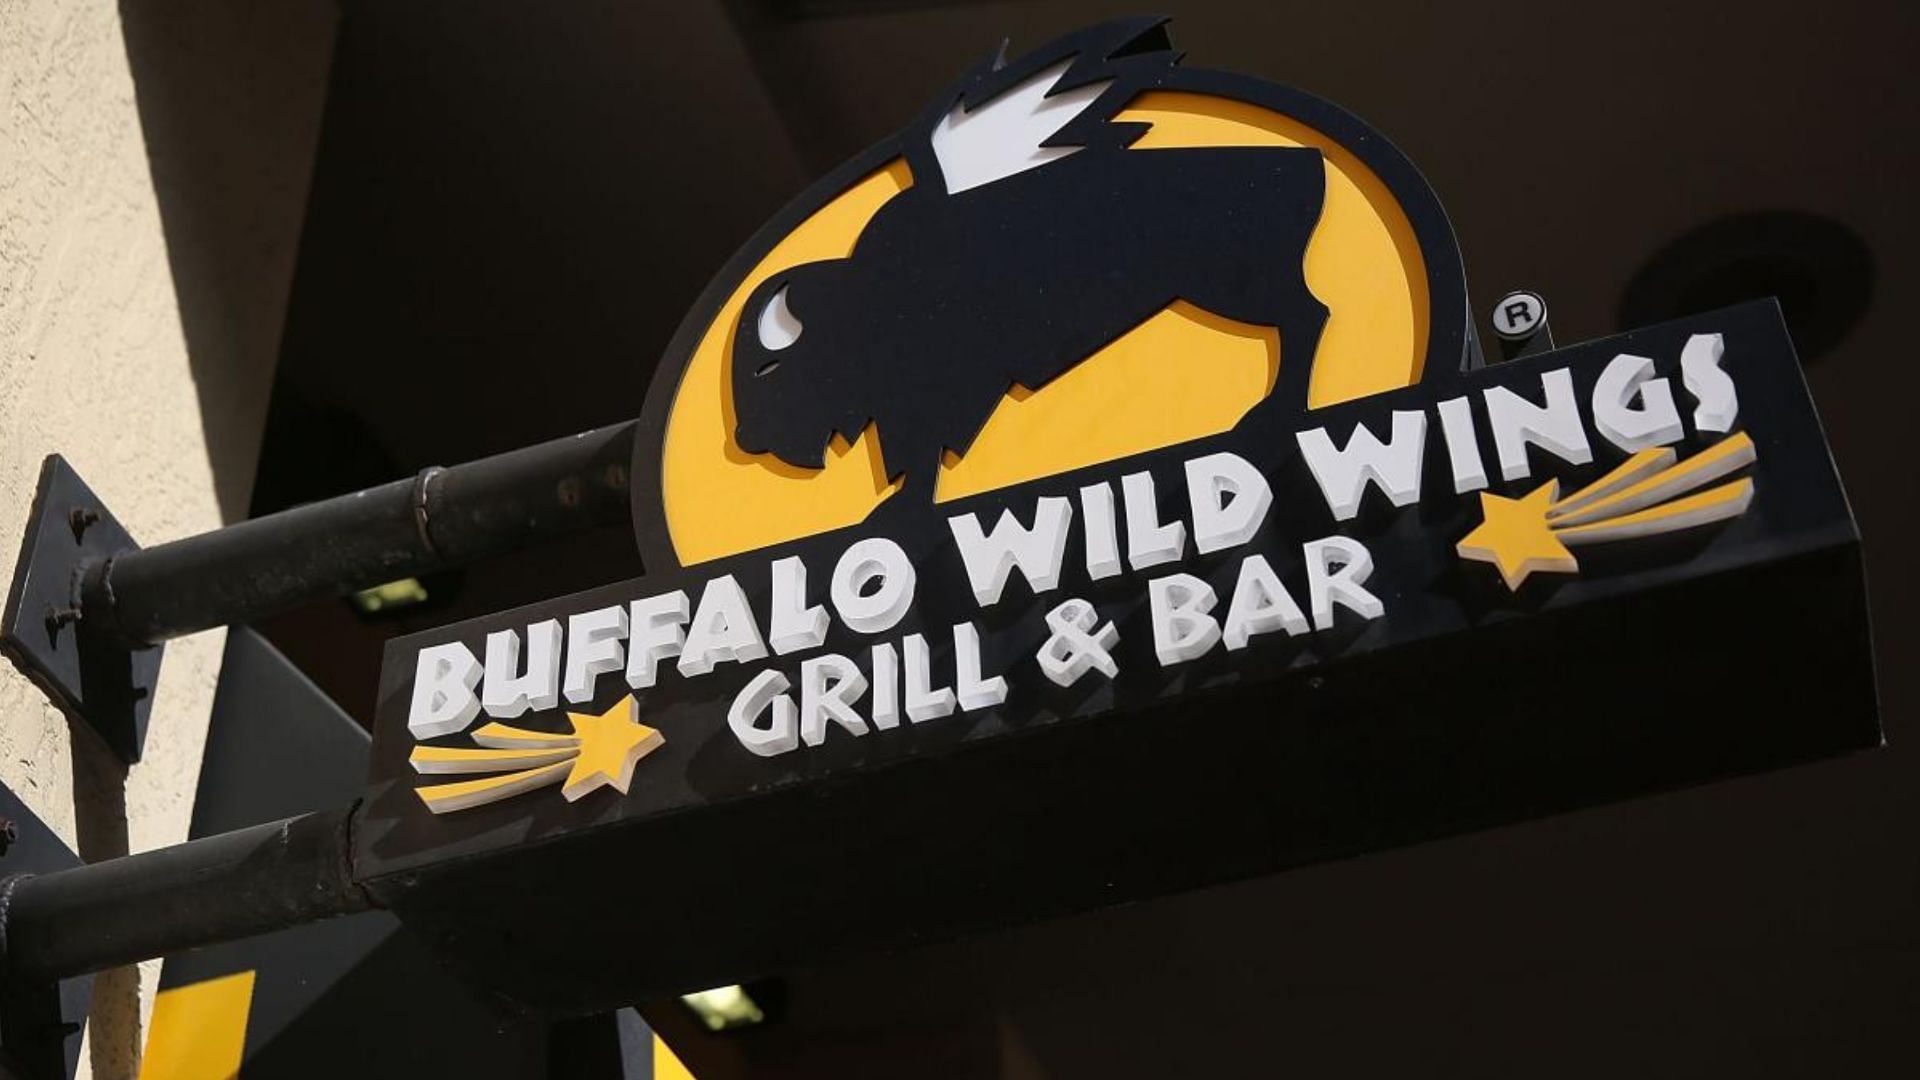 Buffalo Wild Wings sued over claims that its chicken wings is not wings but actually chicken nuggets (Image via Joe Raedle/Getty Images)